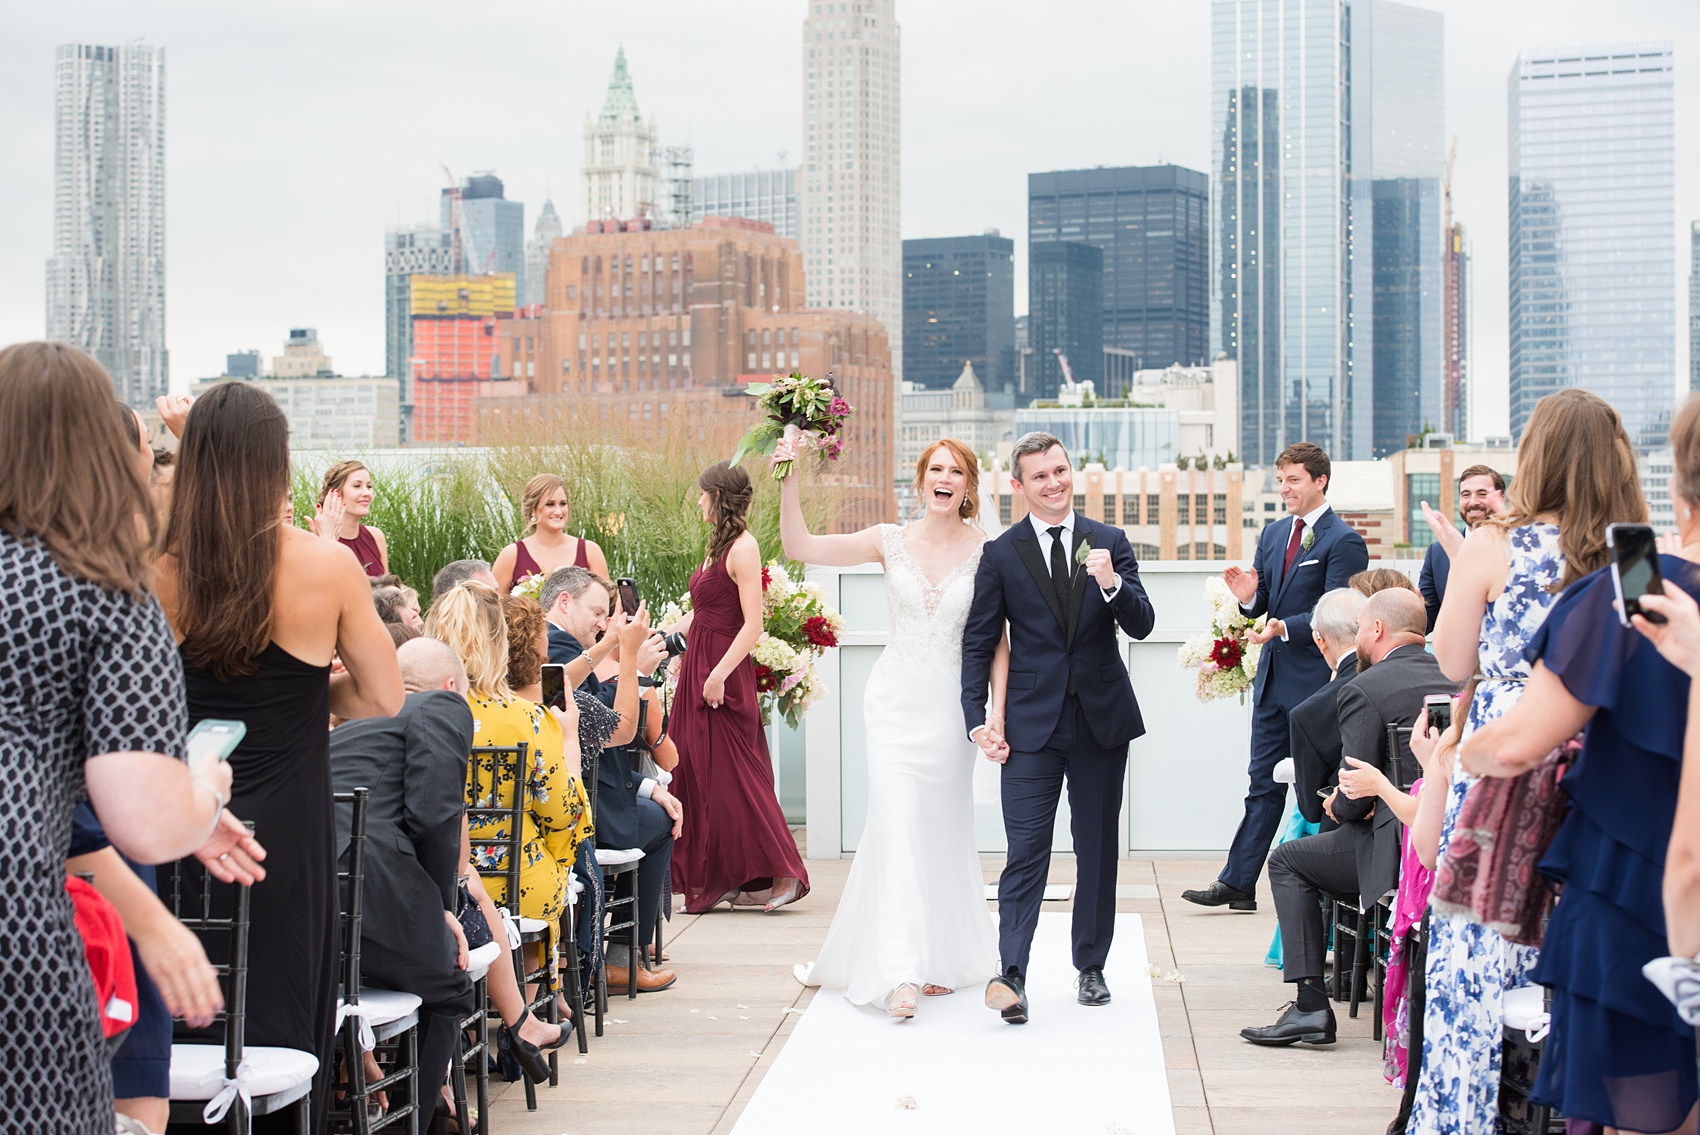 Photos of a NYC wedding venue, Tribeca Rooftop, by Mikkel Paige Photography. This ceremony and reception location has an outdoor space overlooking the Manhattan skyline. These pictures will provide inspiration in New York! The couple dreamed of getting married in this awesome city with flowers and colors of fall. Click through for more details from this beautiful celebration! #TribecaRooftop #NYCVenues #MikkelPaige #NYCwedding #NYCskyline #NYCWeddingPhotos #NYCWeddingPhotography